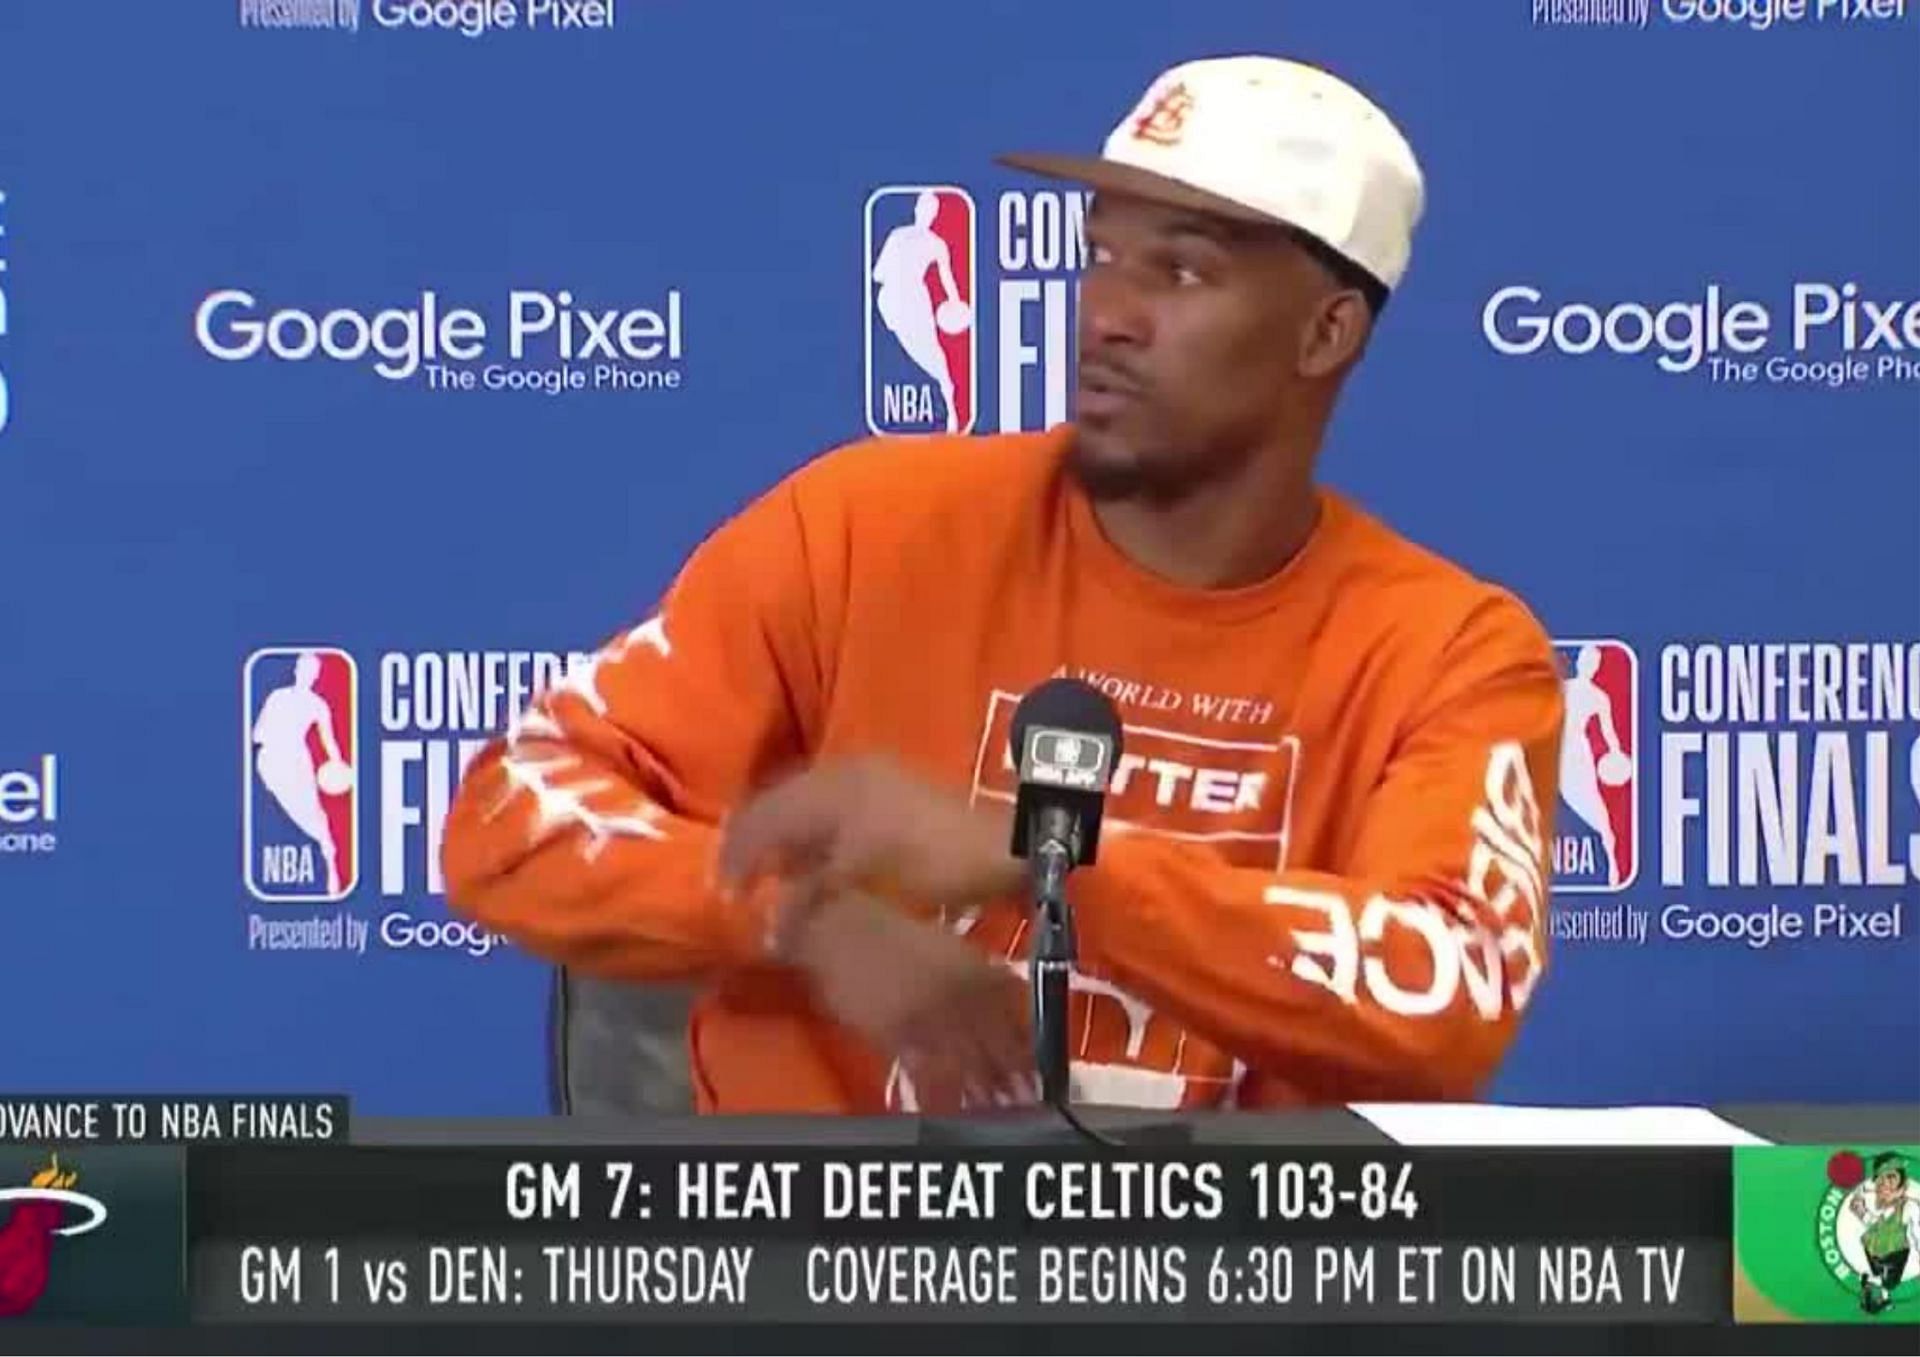 A stray bee interrupted and scared Jimmy Butler in his postgame conference after beating the Boston Celtics in Game 7.